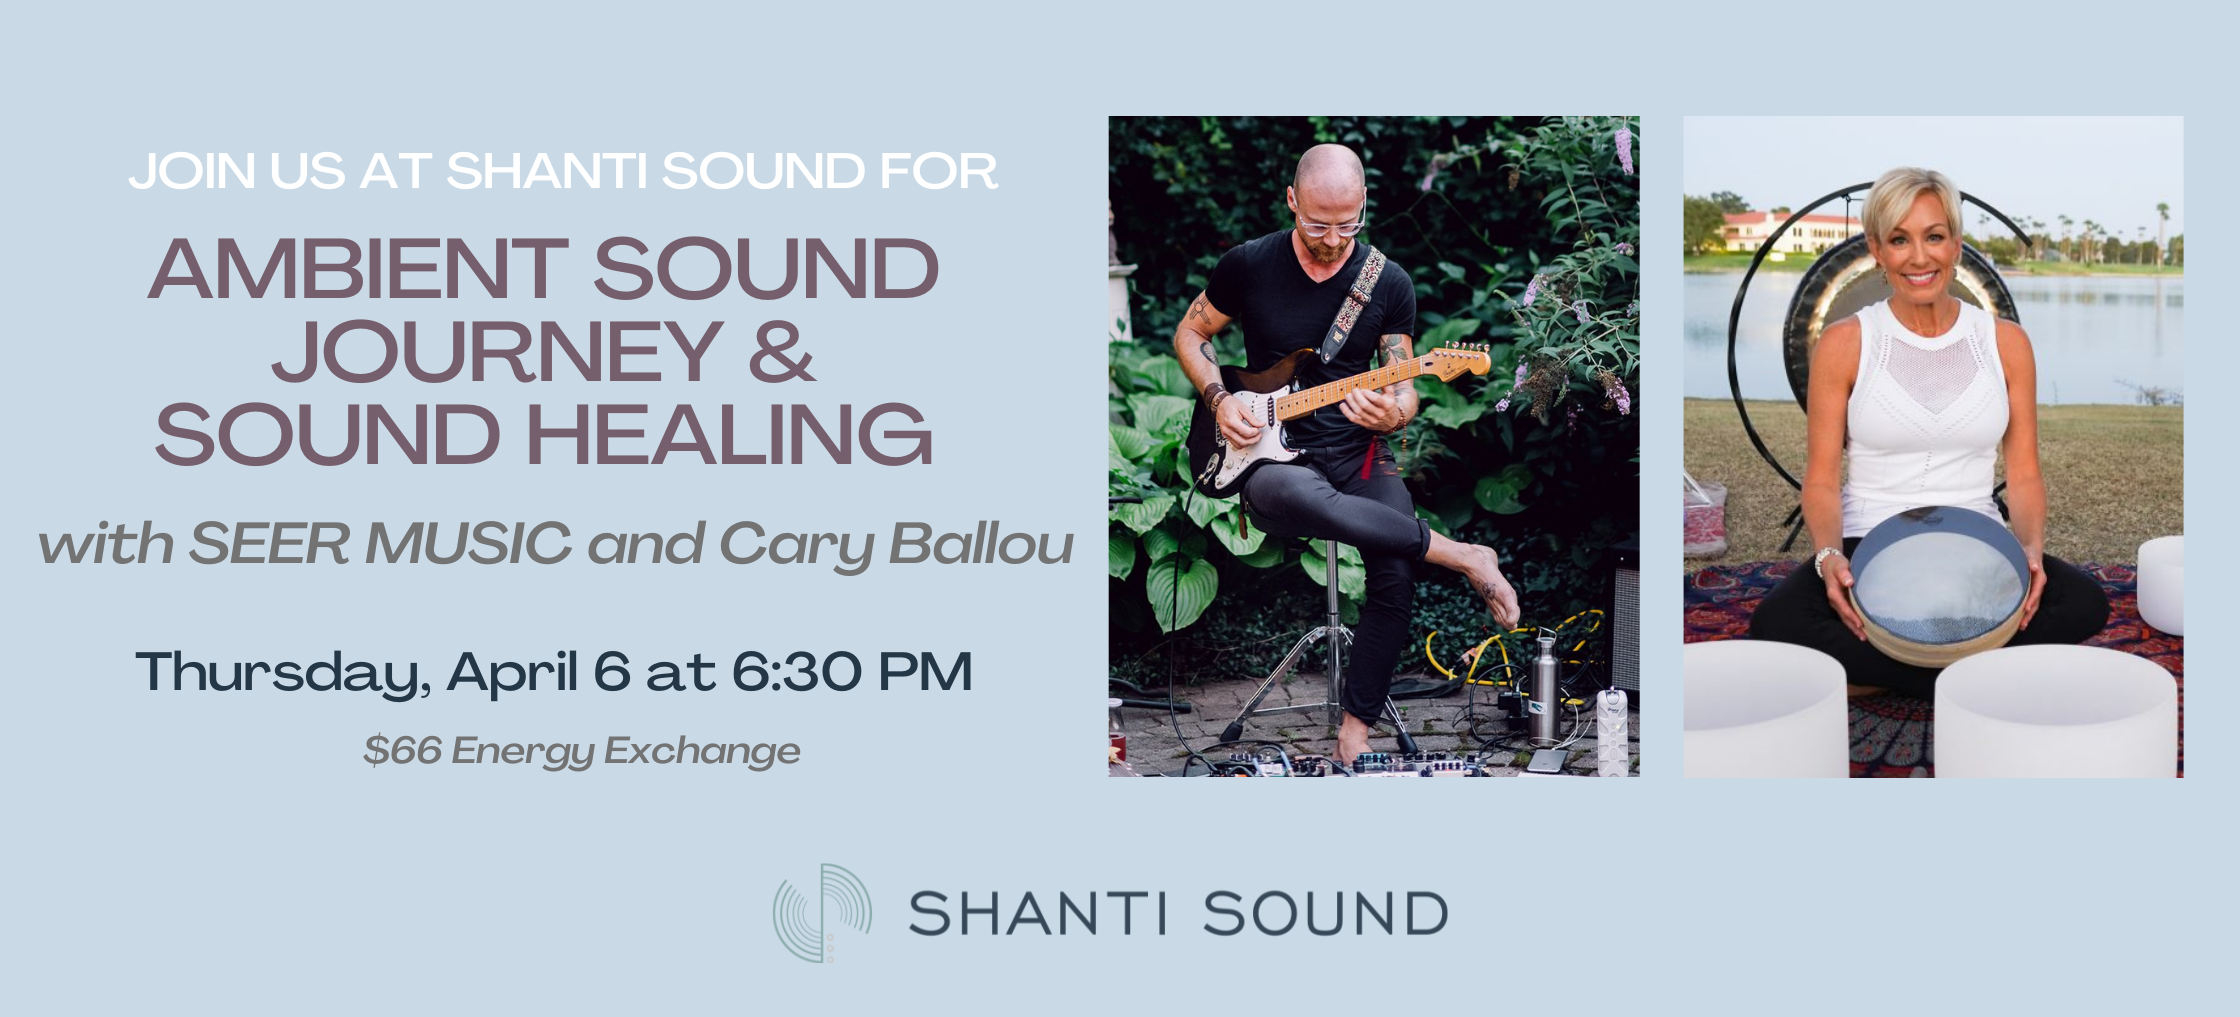 Featured image for “Ambient Sound Journey & Sound Healing with SEER MUSIC and Cary Ballou”